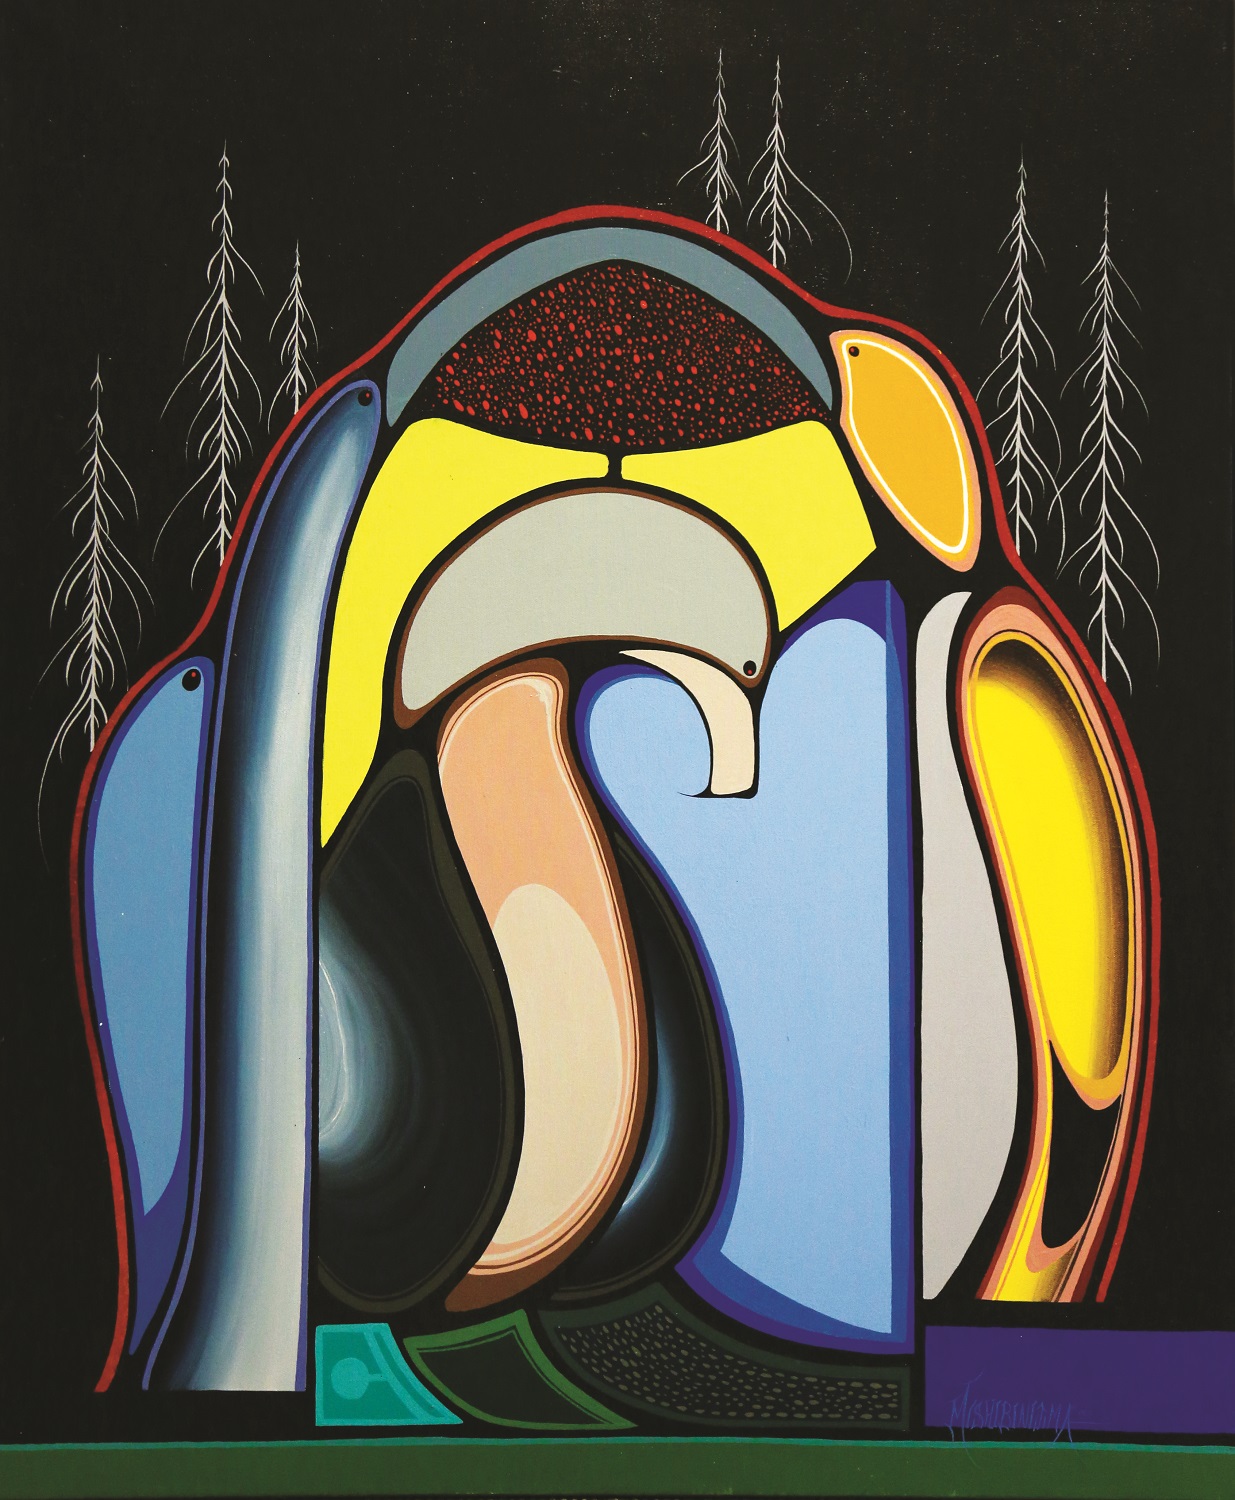 Image of an untitled painting by Indigenous artist James Simon